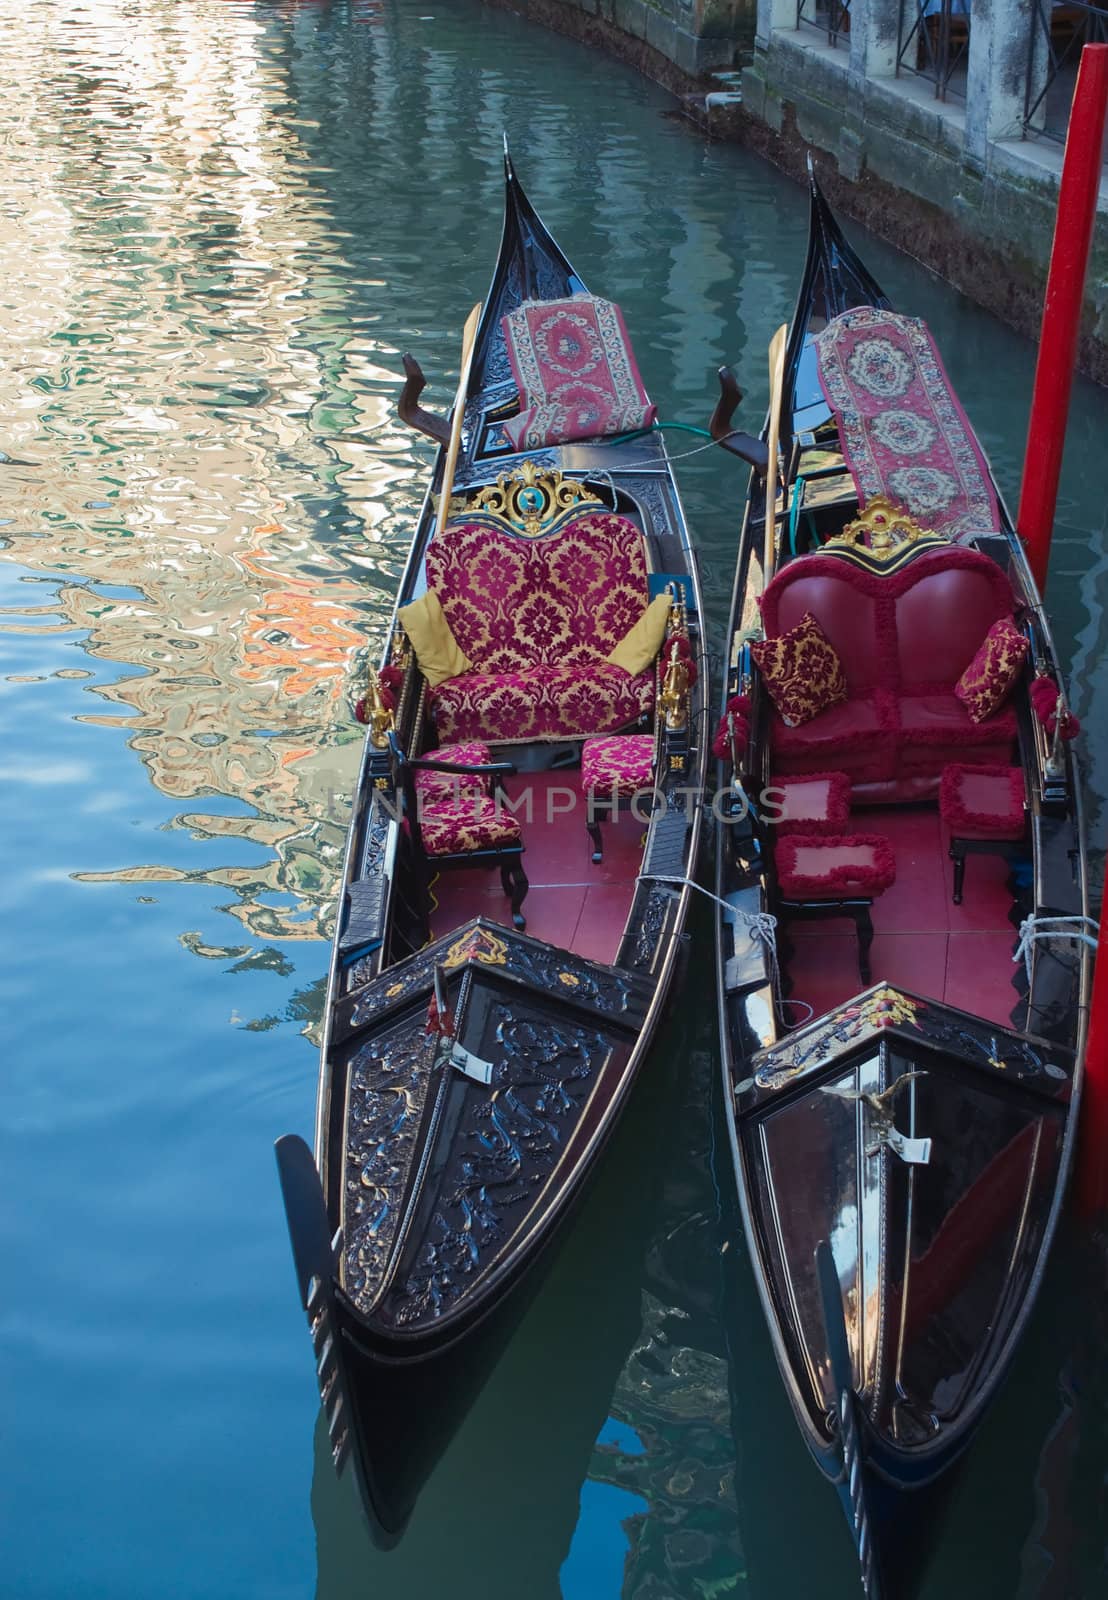 Two gondolas on the canal in Venice, and the reflections